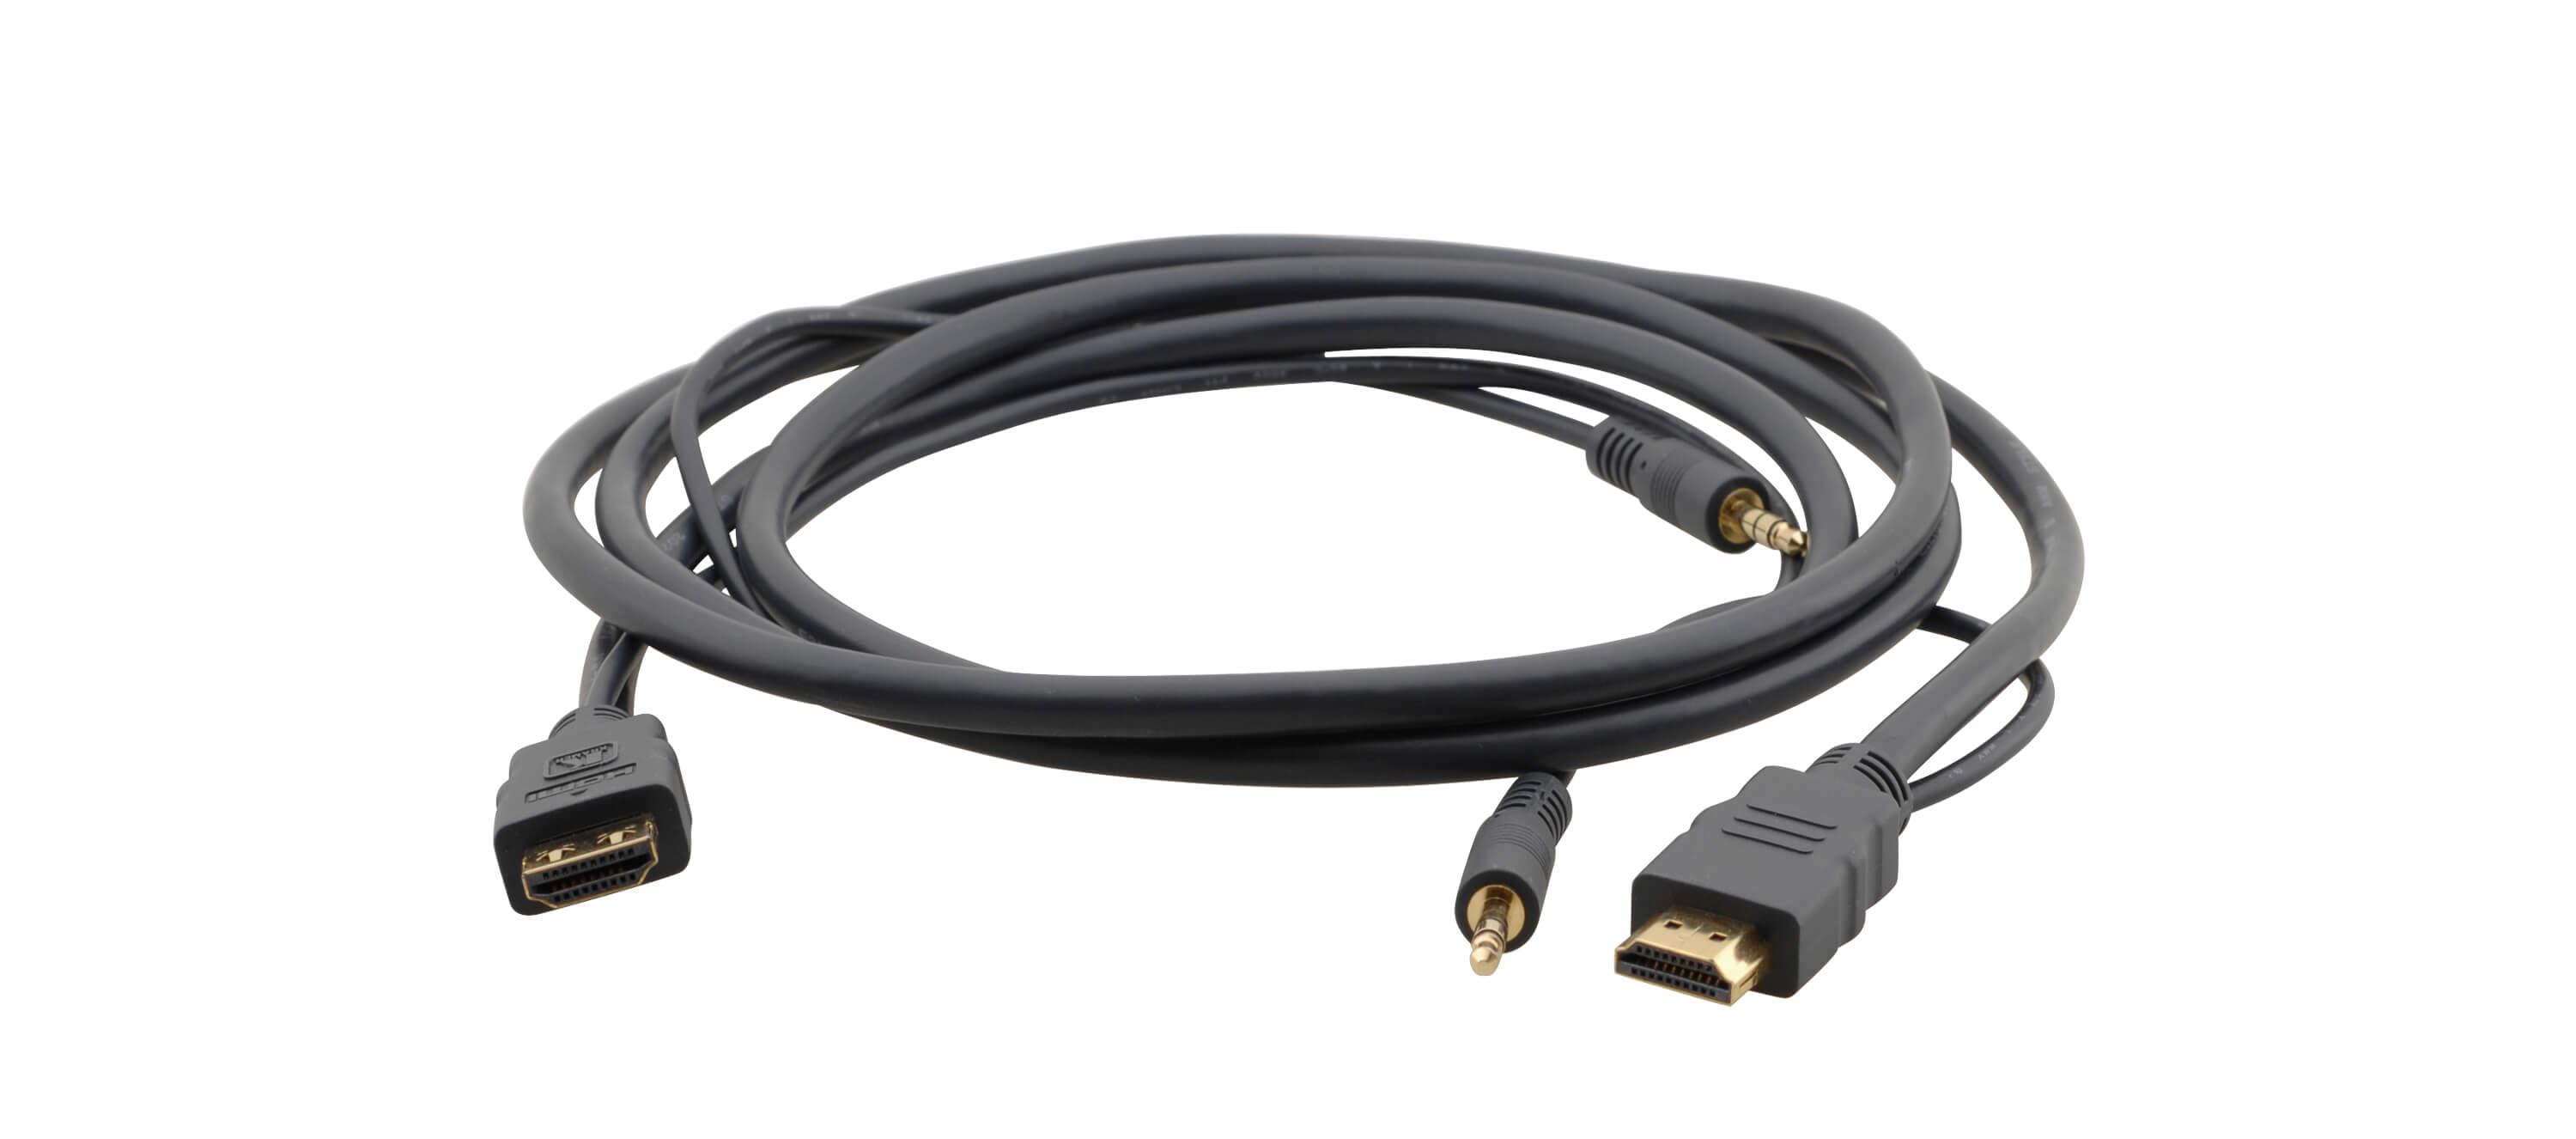 Kramer C-MHMA/MHMA-3 Cable HDMI To HDMI With Ethernet Plus Audio 3.5mm | Full Systems